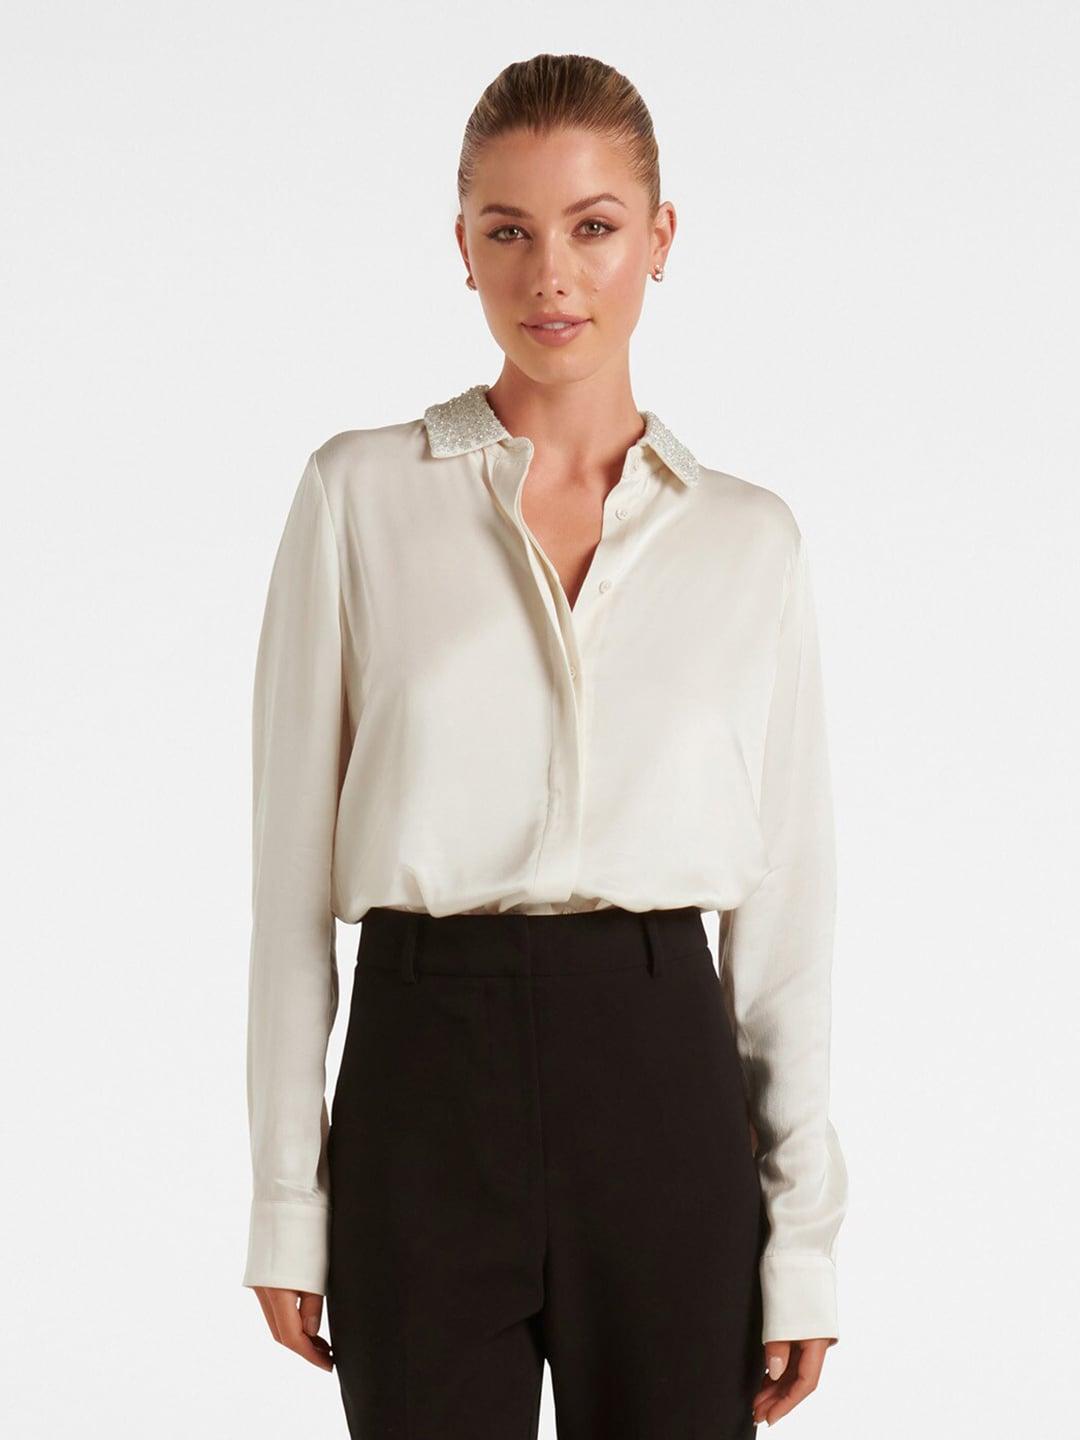 forever-new-embellished-spread-collar-opaque-formal-satin-shirt